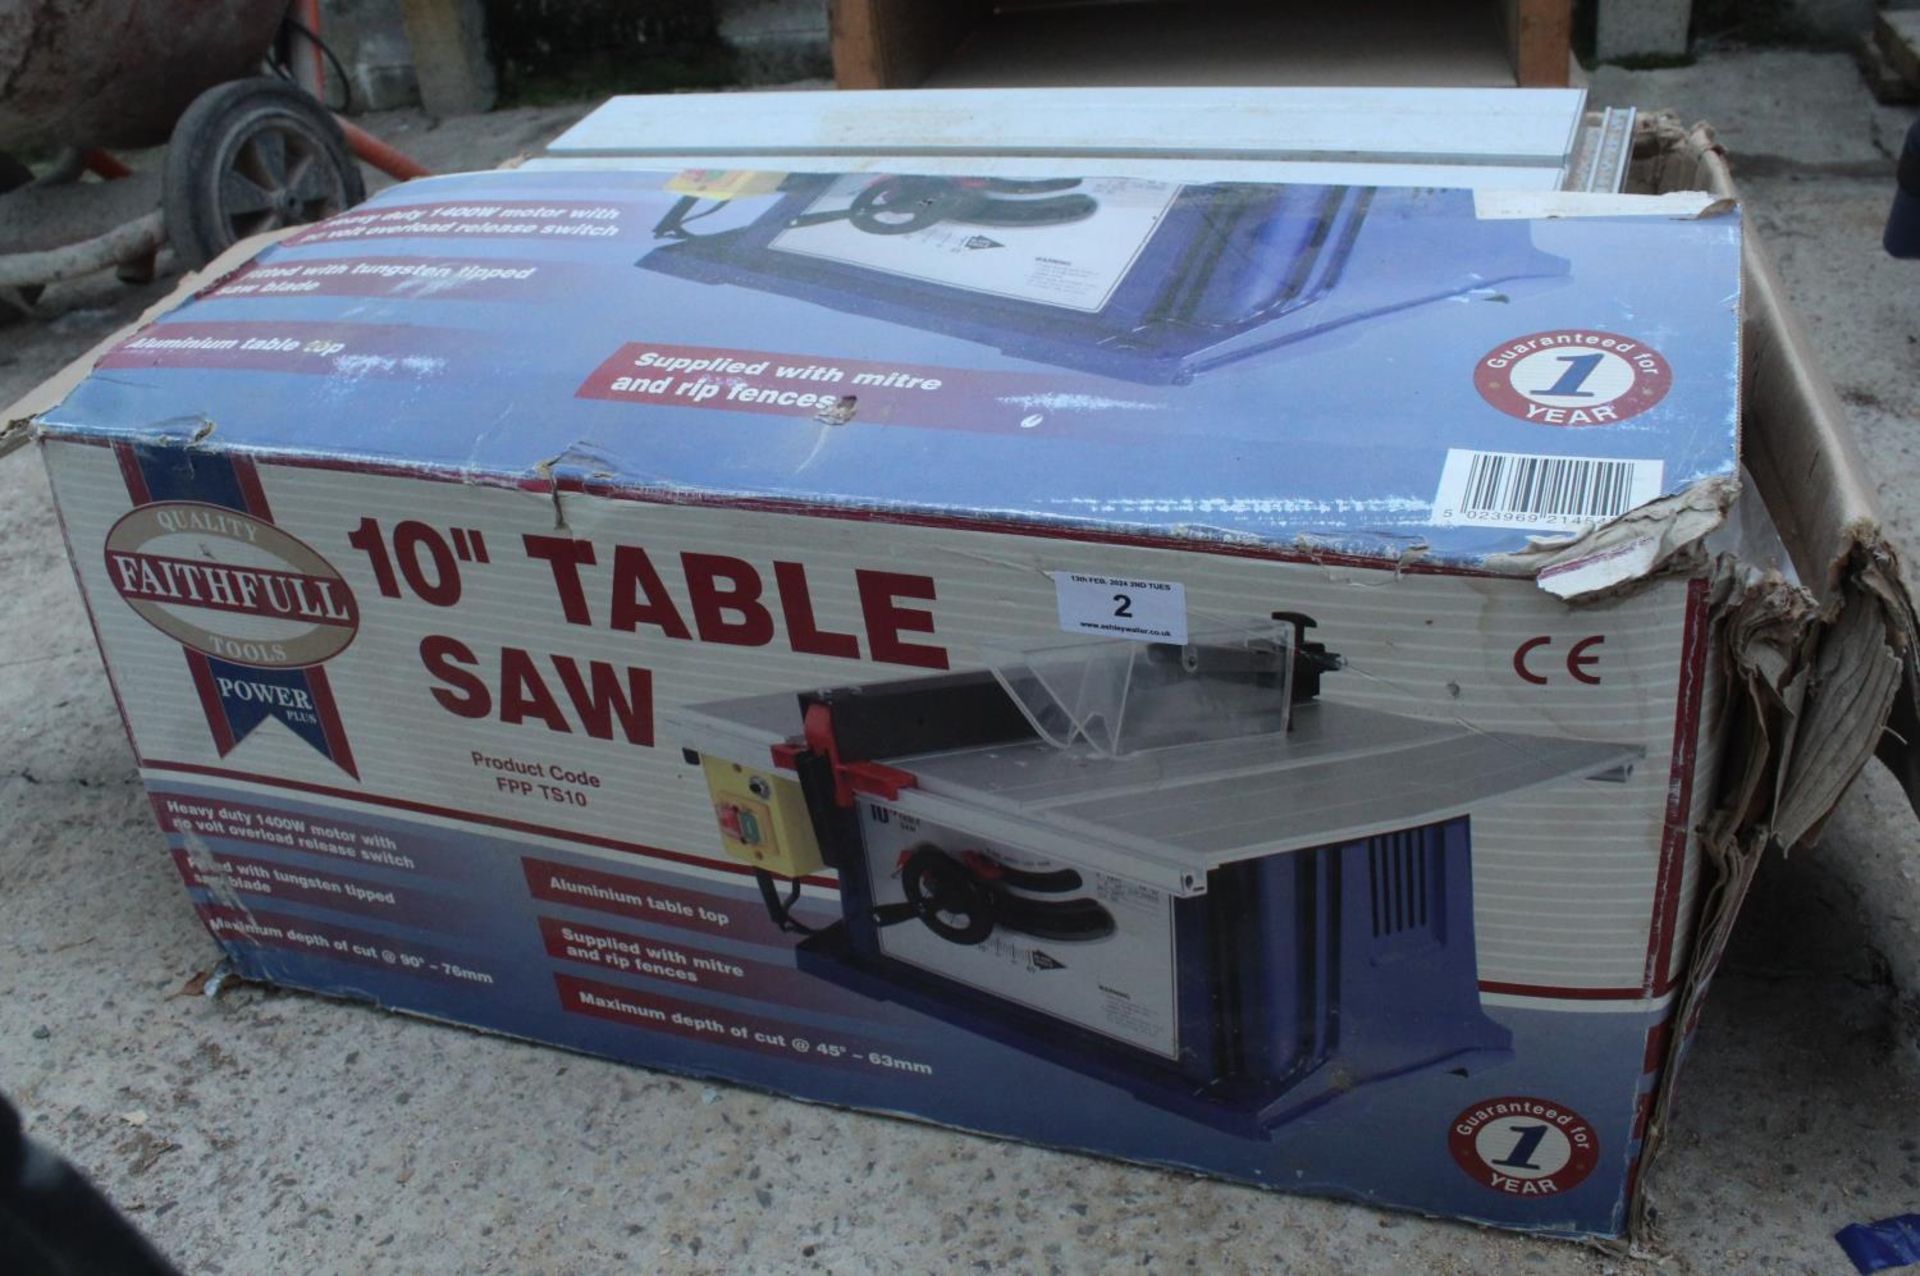 FAITHFUL 10" TABLE SAW MODEL DW738 WITH INSTRUCTION MANUEL + VAT FROM THE BUILDERS MERCHANTS